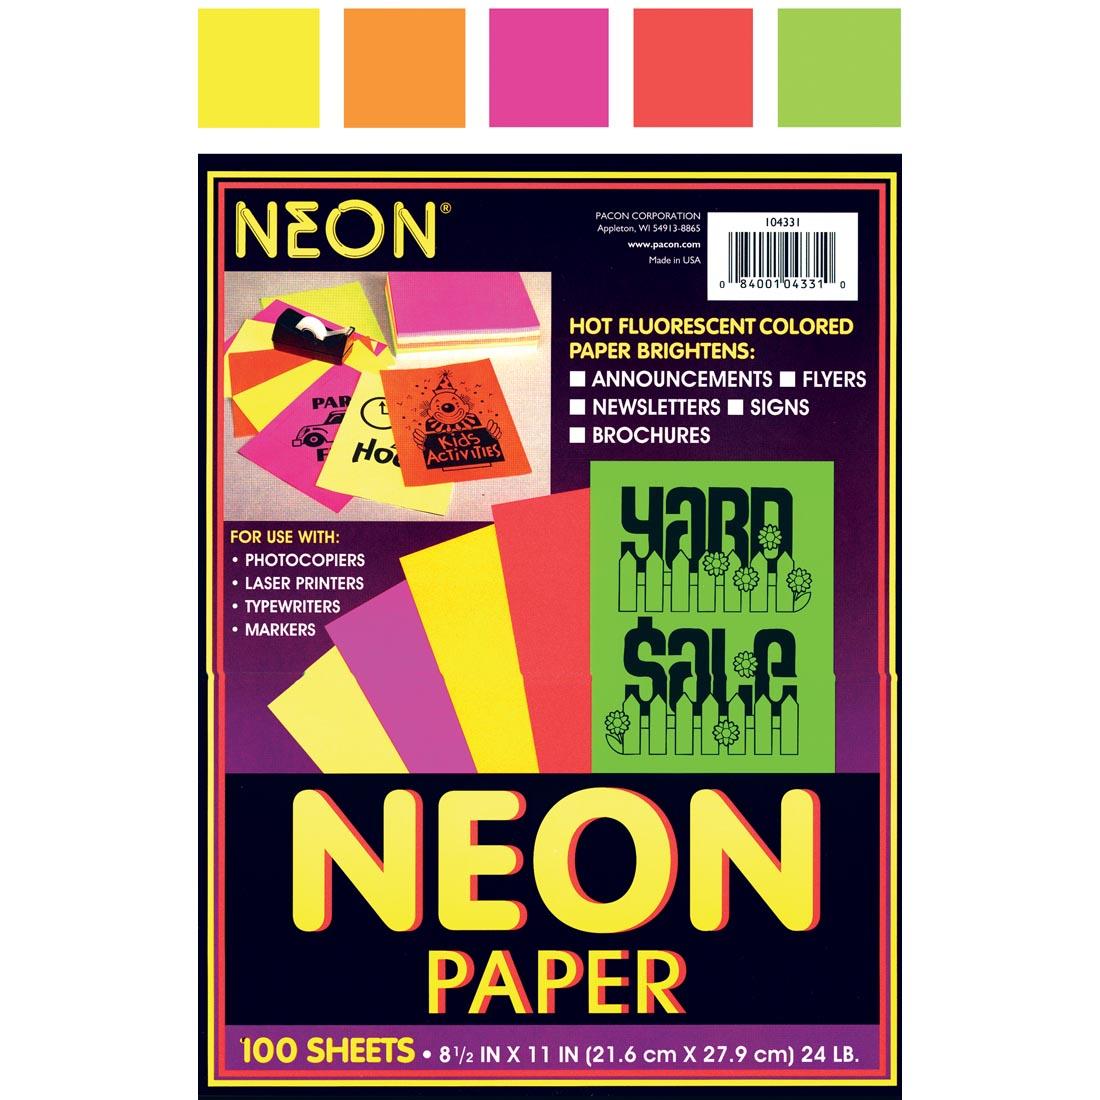 Pacon NEON Bond Paper with five color swatches